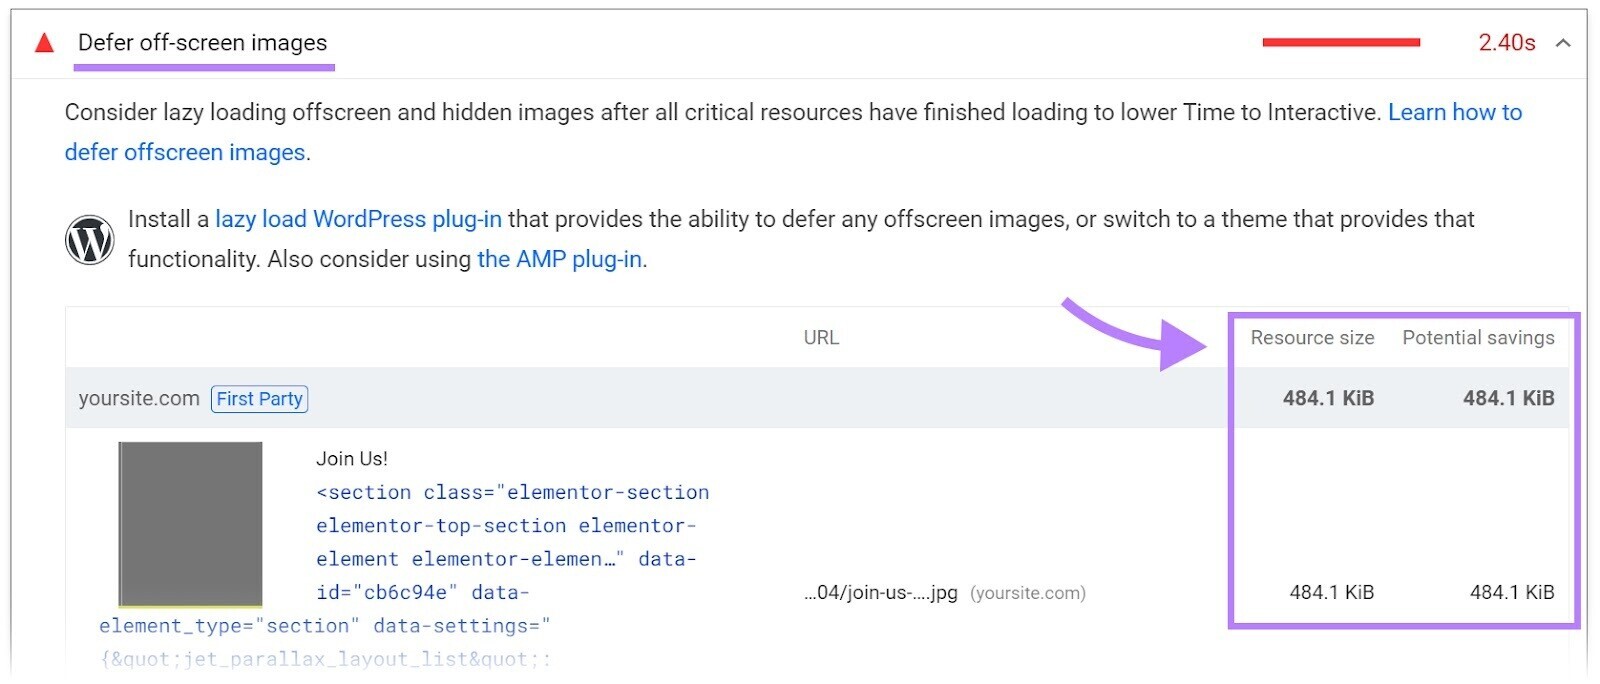 "Defer off-screen images" s،ws resource size and ،ential savings for images